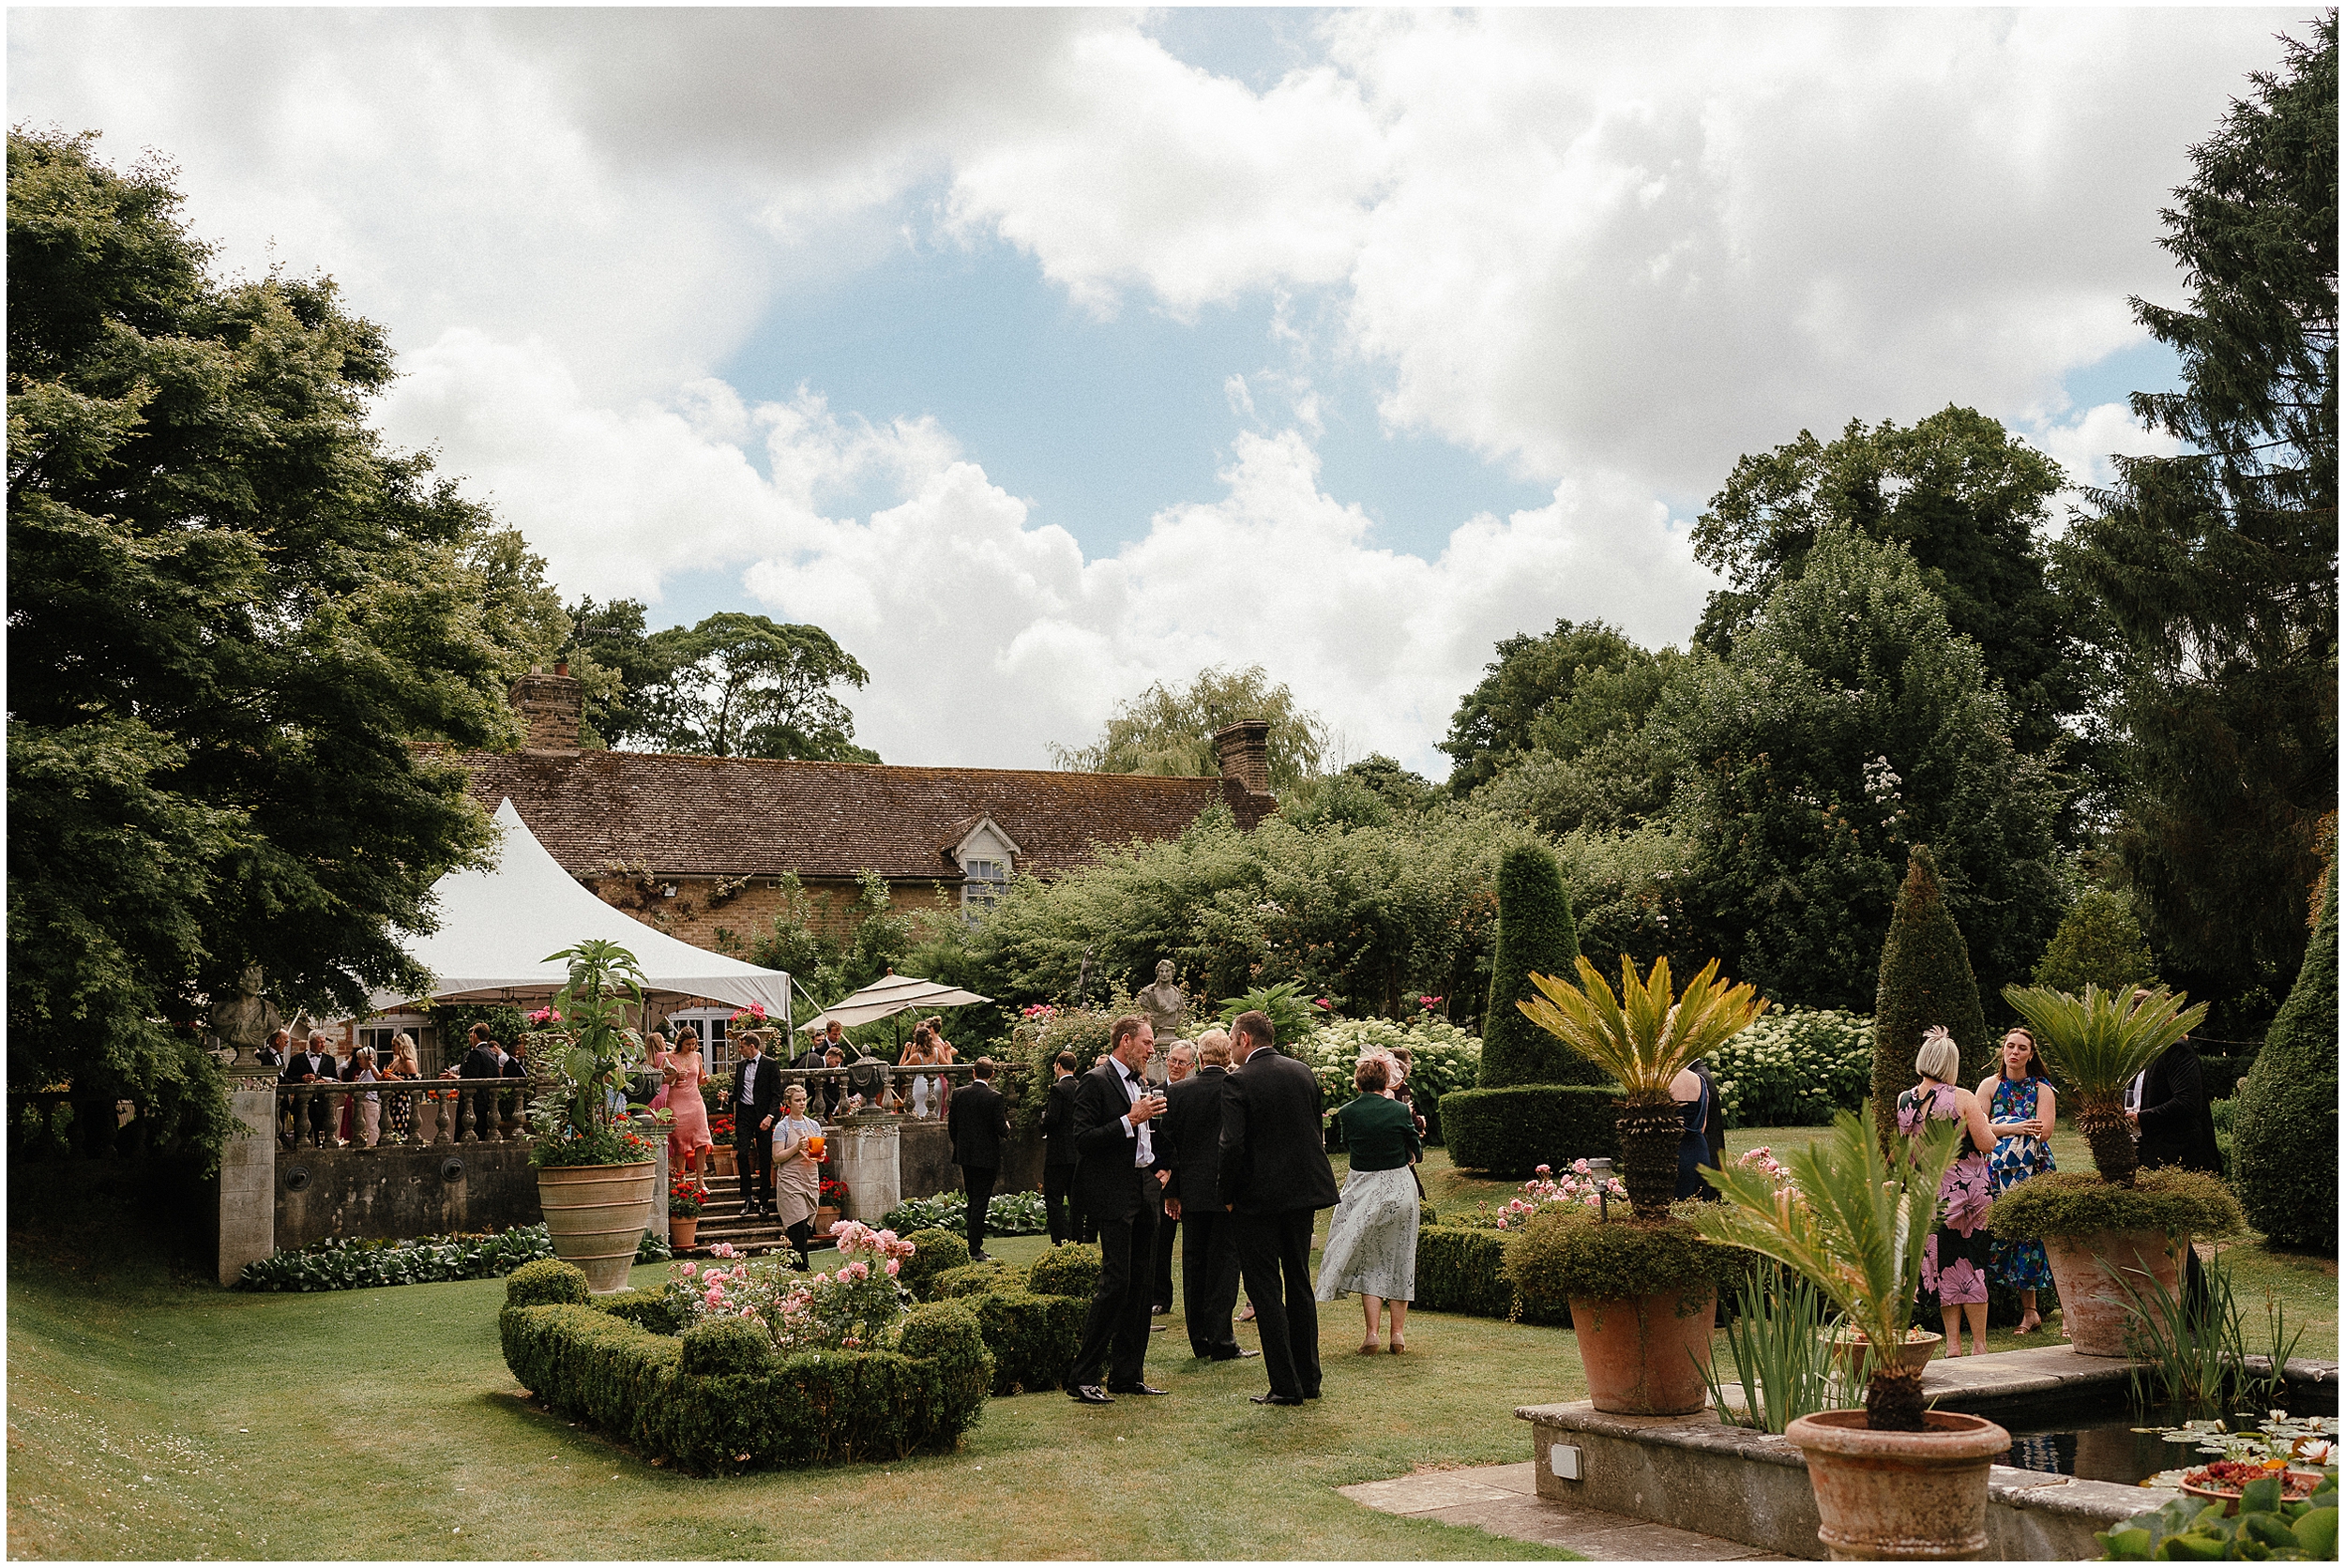 Wedding guests in the gardens of the old rectory estate. 